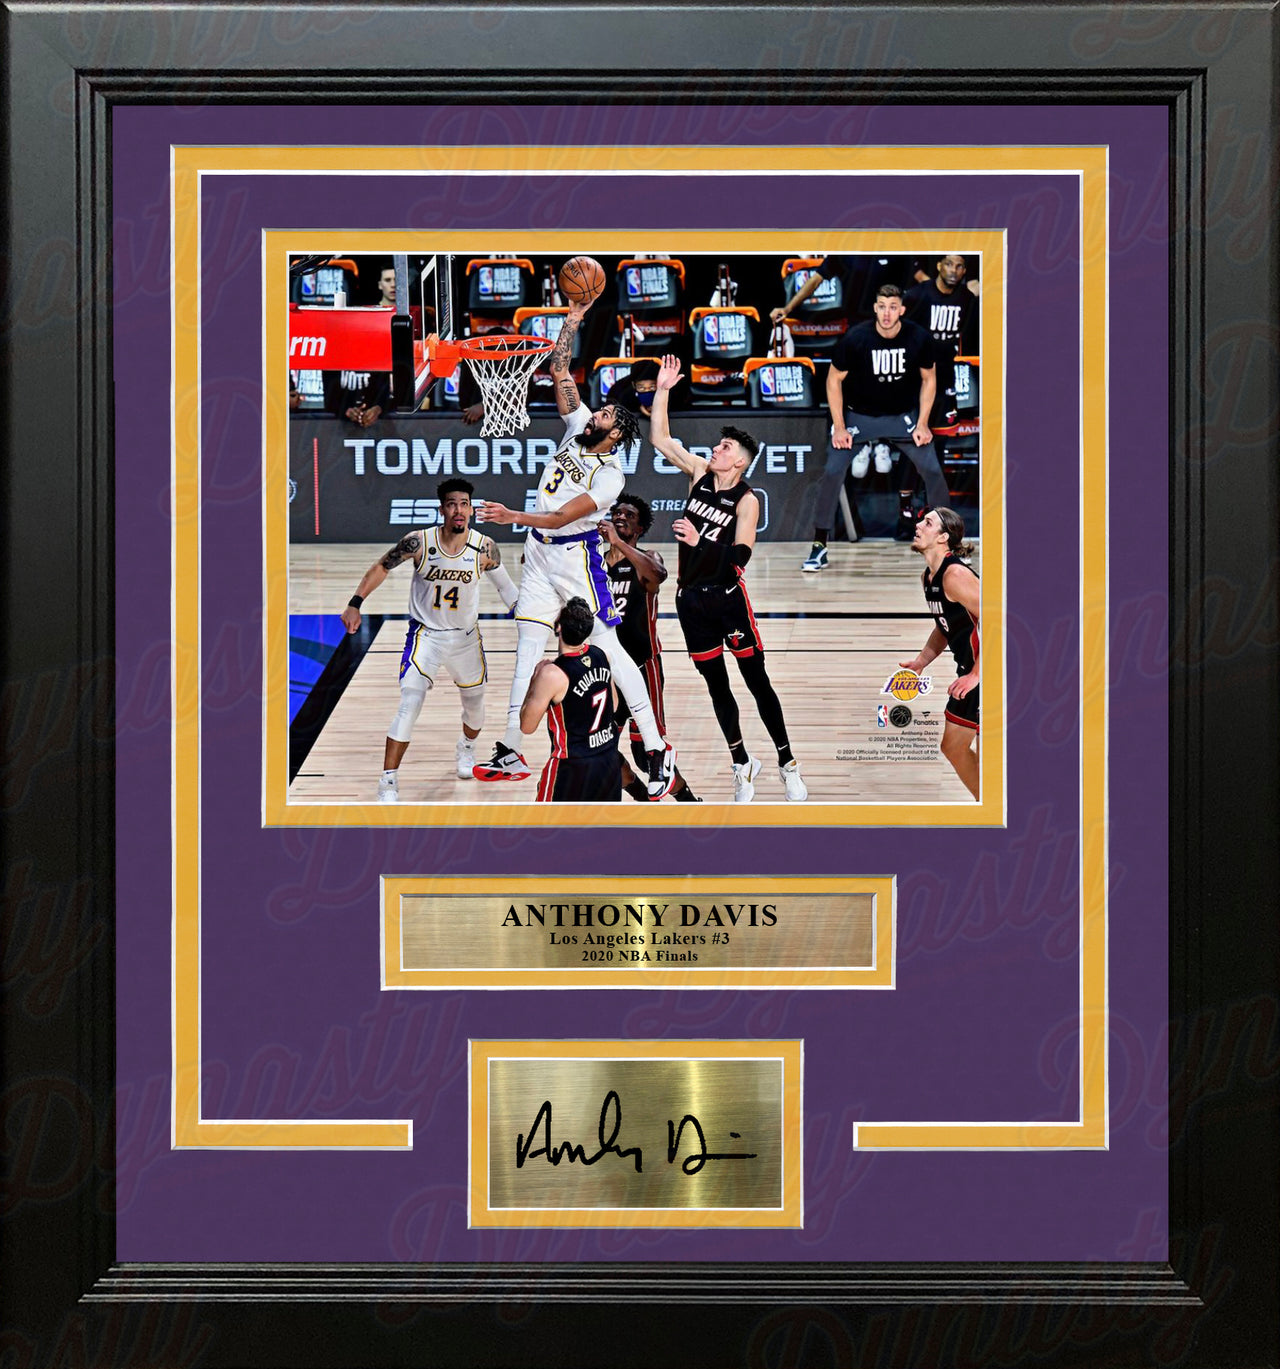 Anthony Davis 2020 NBA Finals Slam Dunk Los Angeles Lakers 8x10 Framed Photo with Engraved Autograph - Dynasty Sports & Framing 